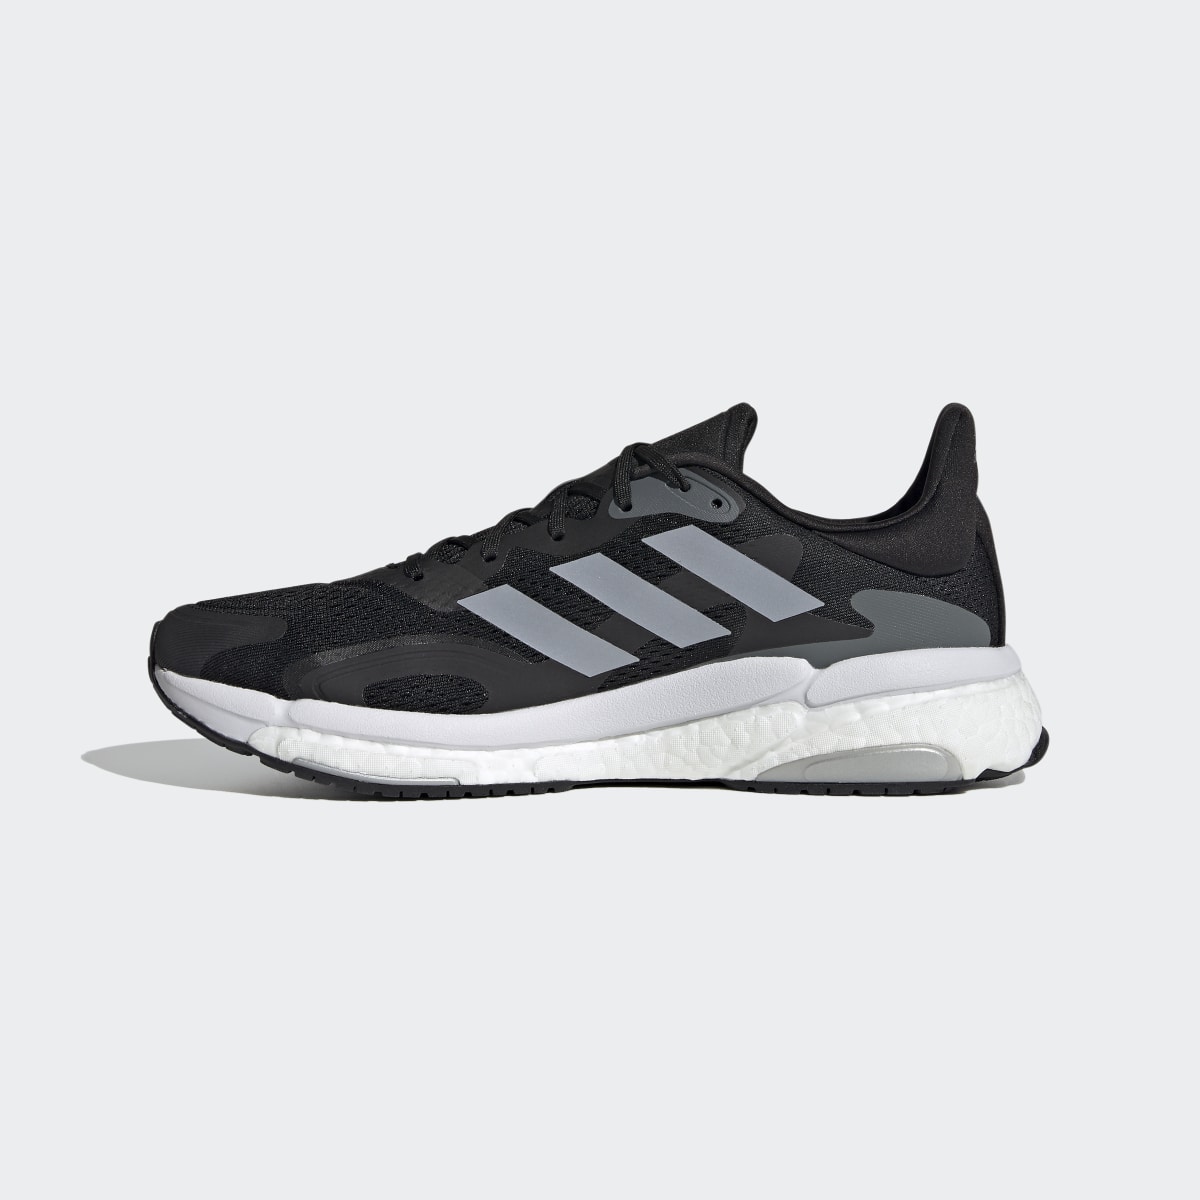 Adidas SolarBoost 3 Shoes. 8